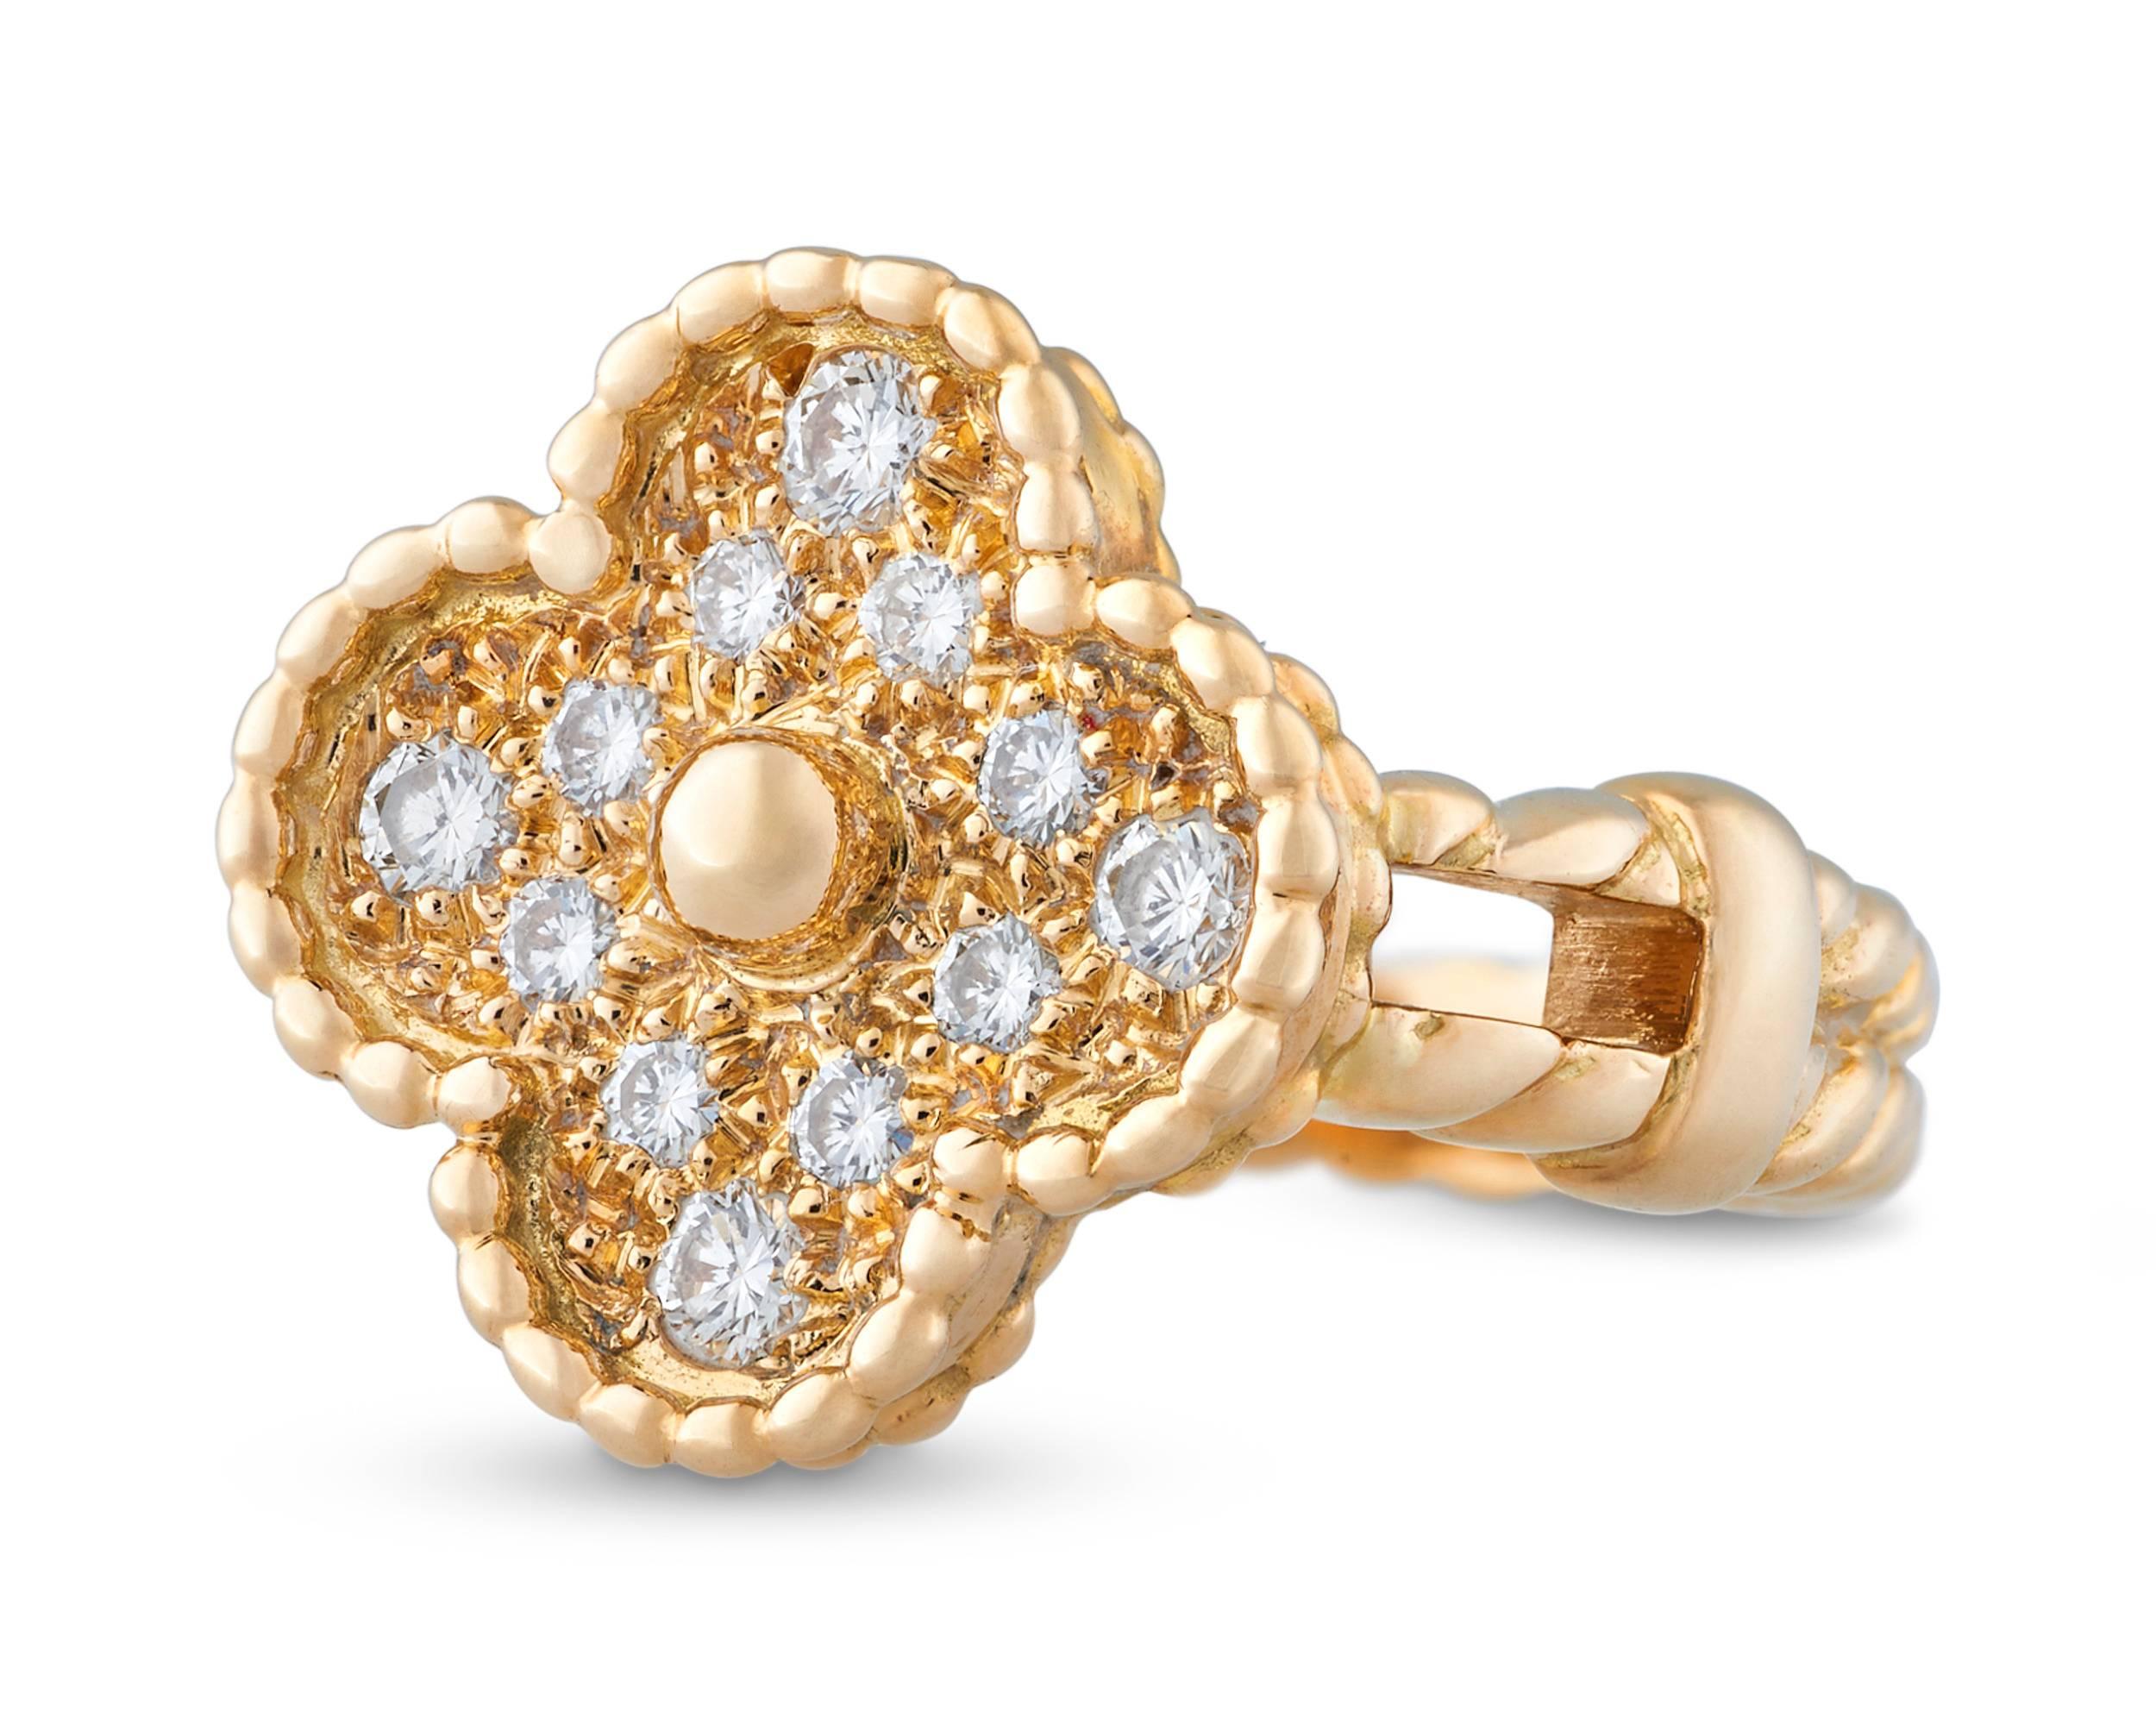 This exquisite diamond ring hails from Van Cleef & Arpels' popular Alhambra Collection. The iconic clover design has been an enduring and highly coveted motif since it was first introduced by the firm in 1968.  Crafted of 18k yellow gold, this ring